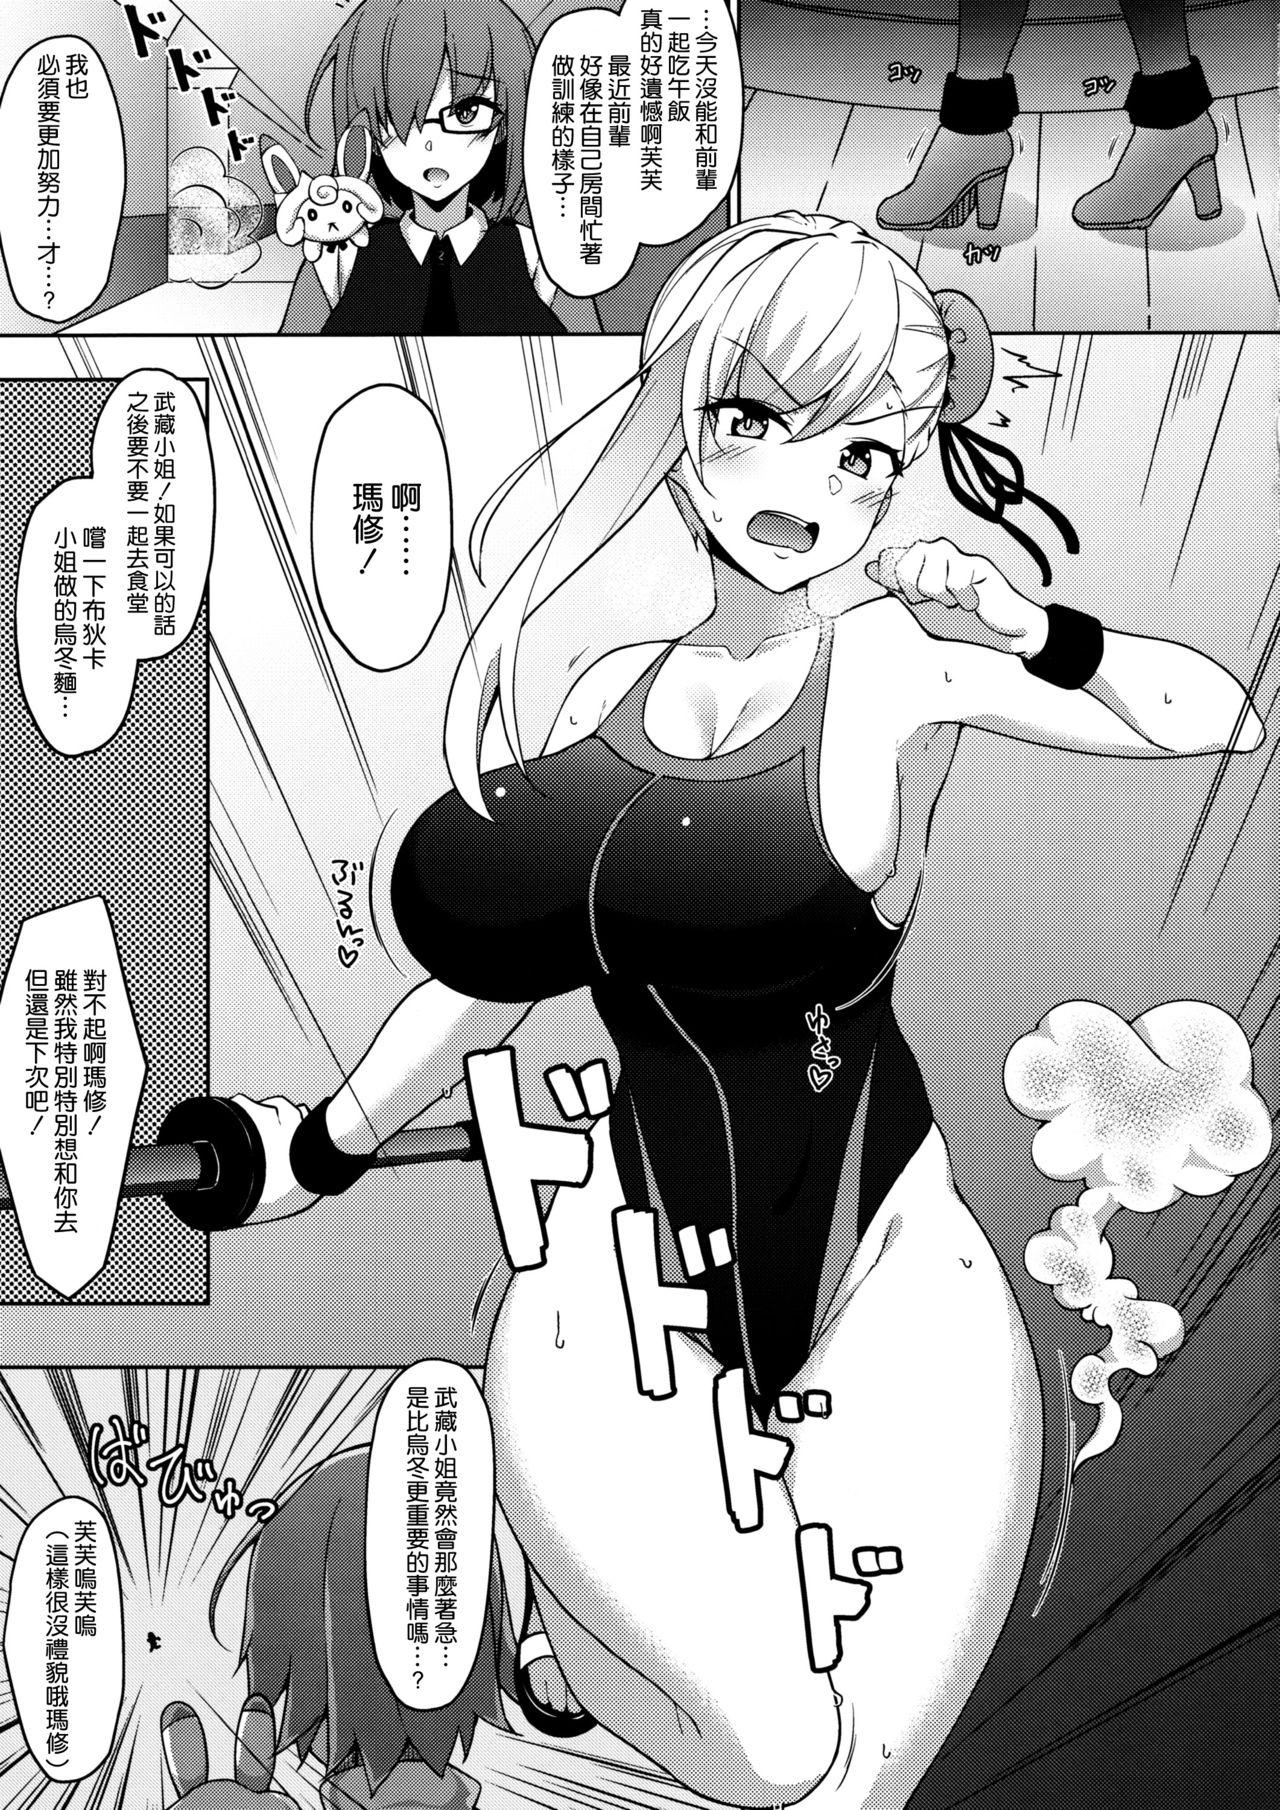 Chinese (C97) [Cow Lipid (Fuurai)] U-D-N-S (Fate/Grand Order) [Chinese] [空気系☆漢化] - Fate grand order Abuse - Page 5